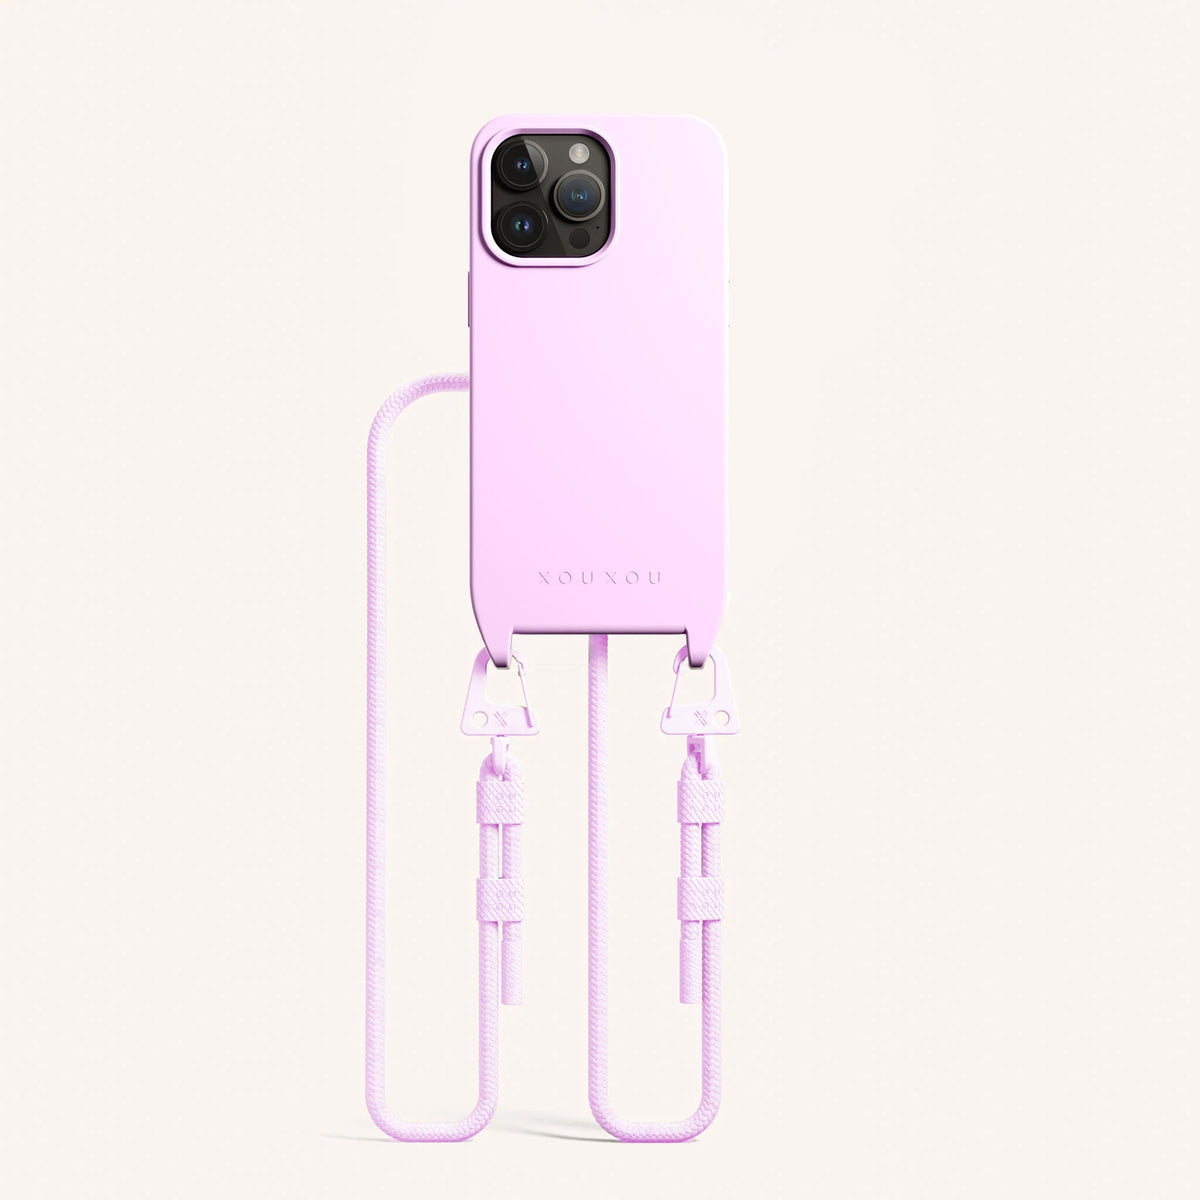 Phone Necklace with Carabiner Rope for iPhone 15 Pro with MagSafe in Rosato | XOUXOU #phone model_iphone 13 pro max